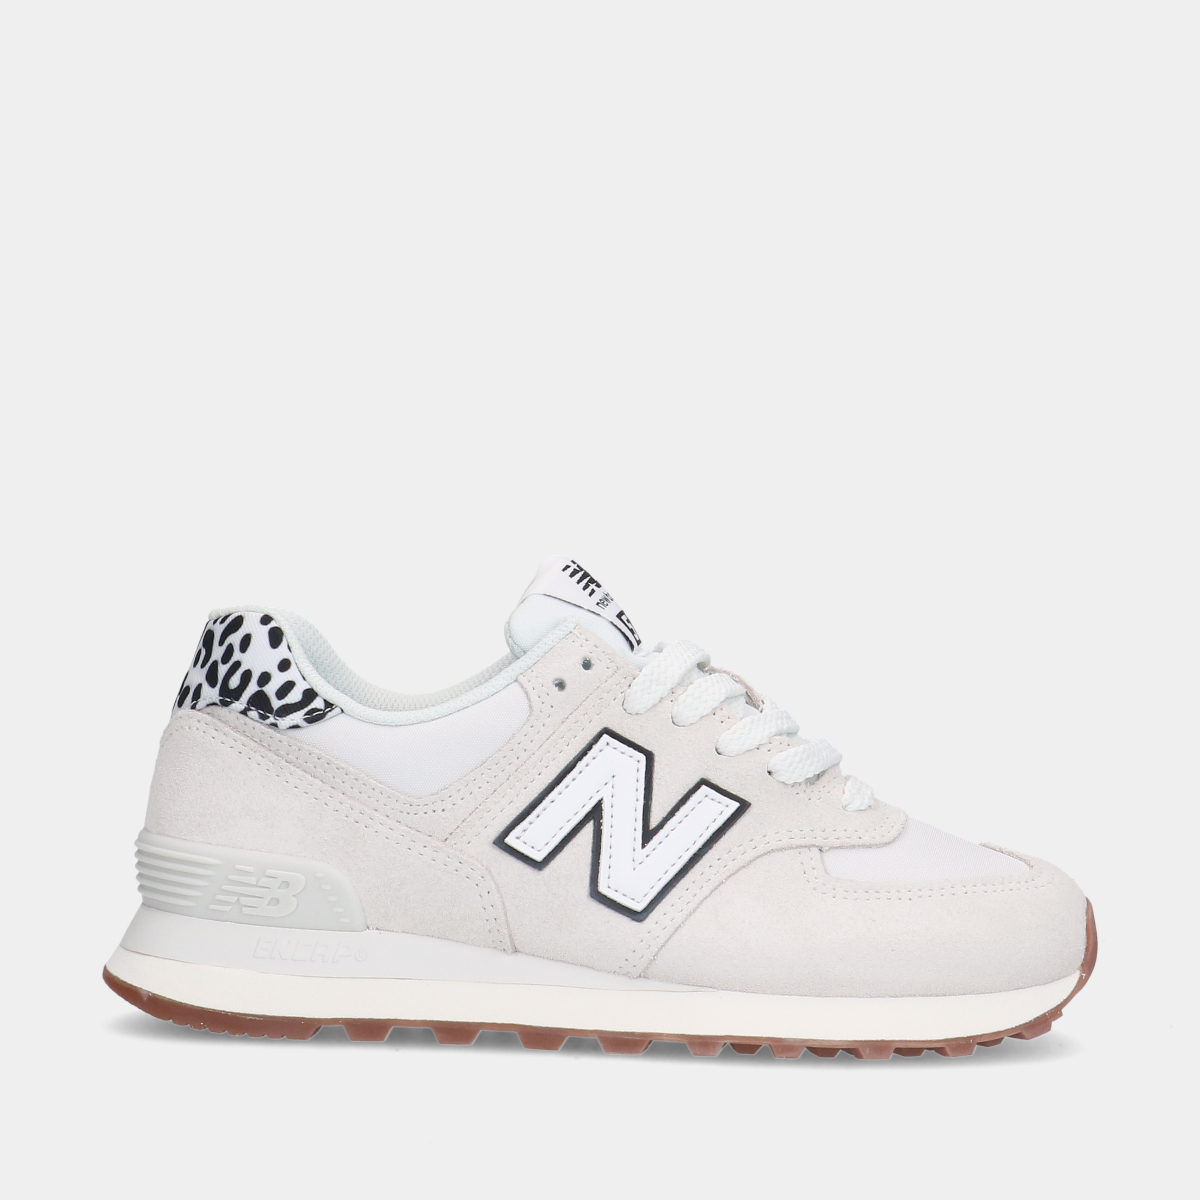 New Balance 574 Reflection dames sneakers